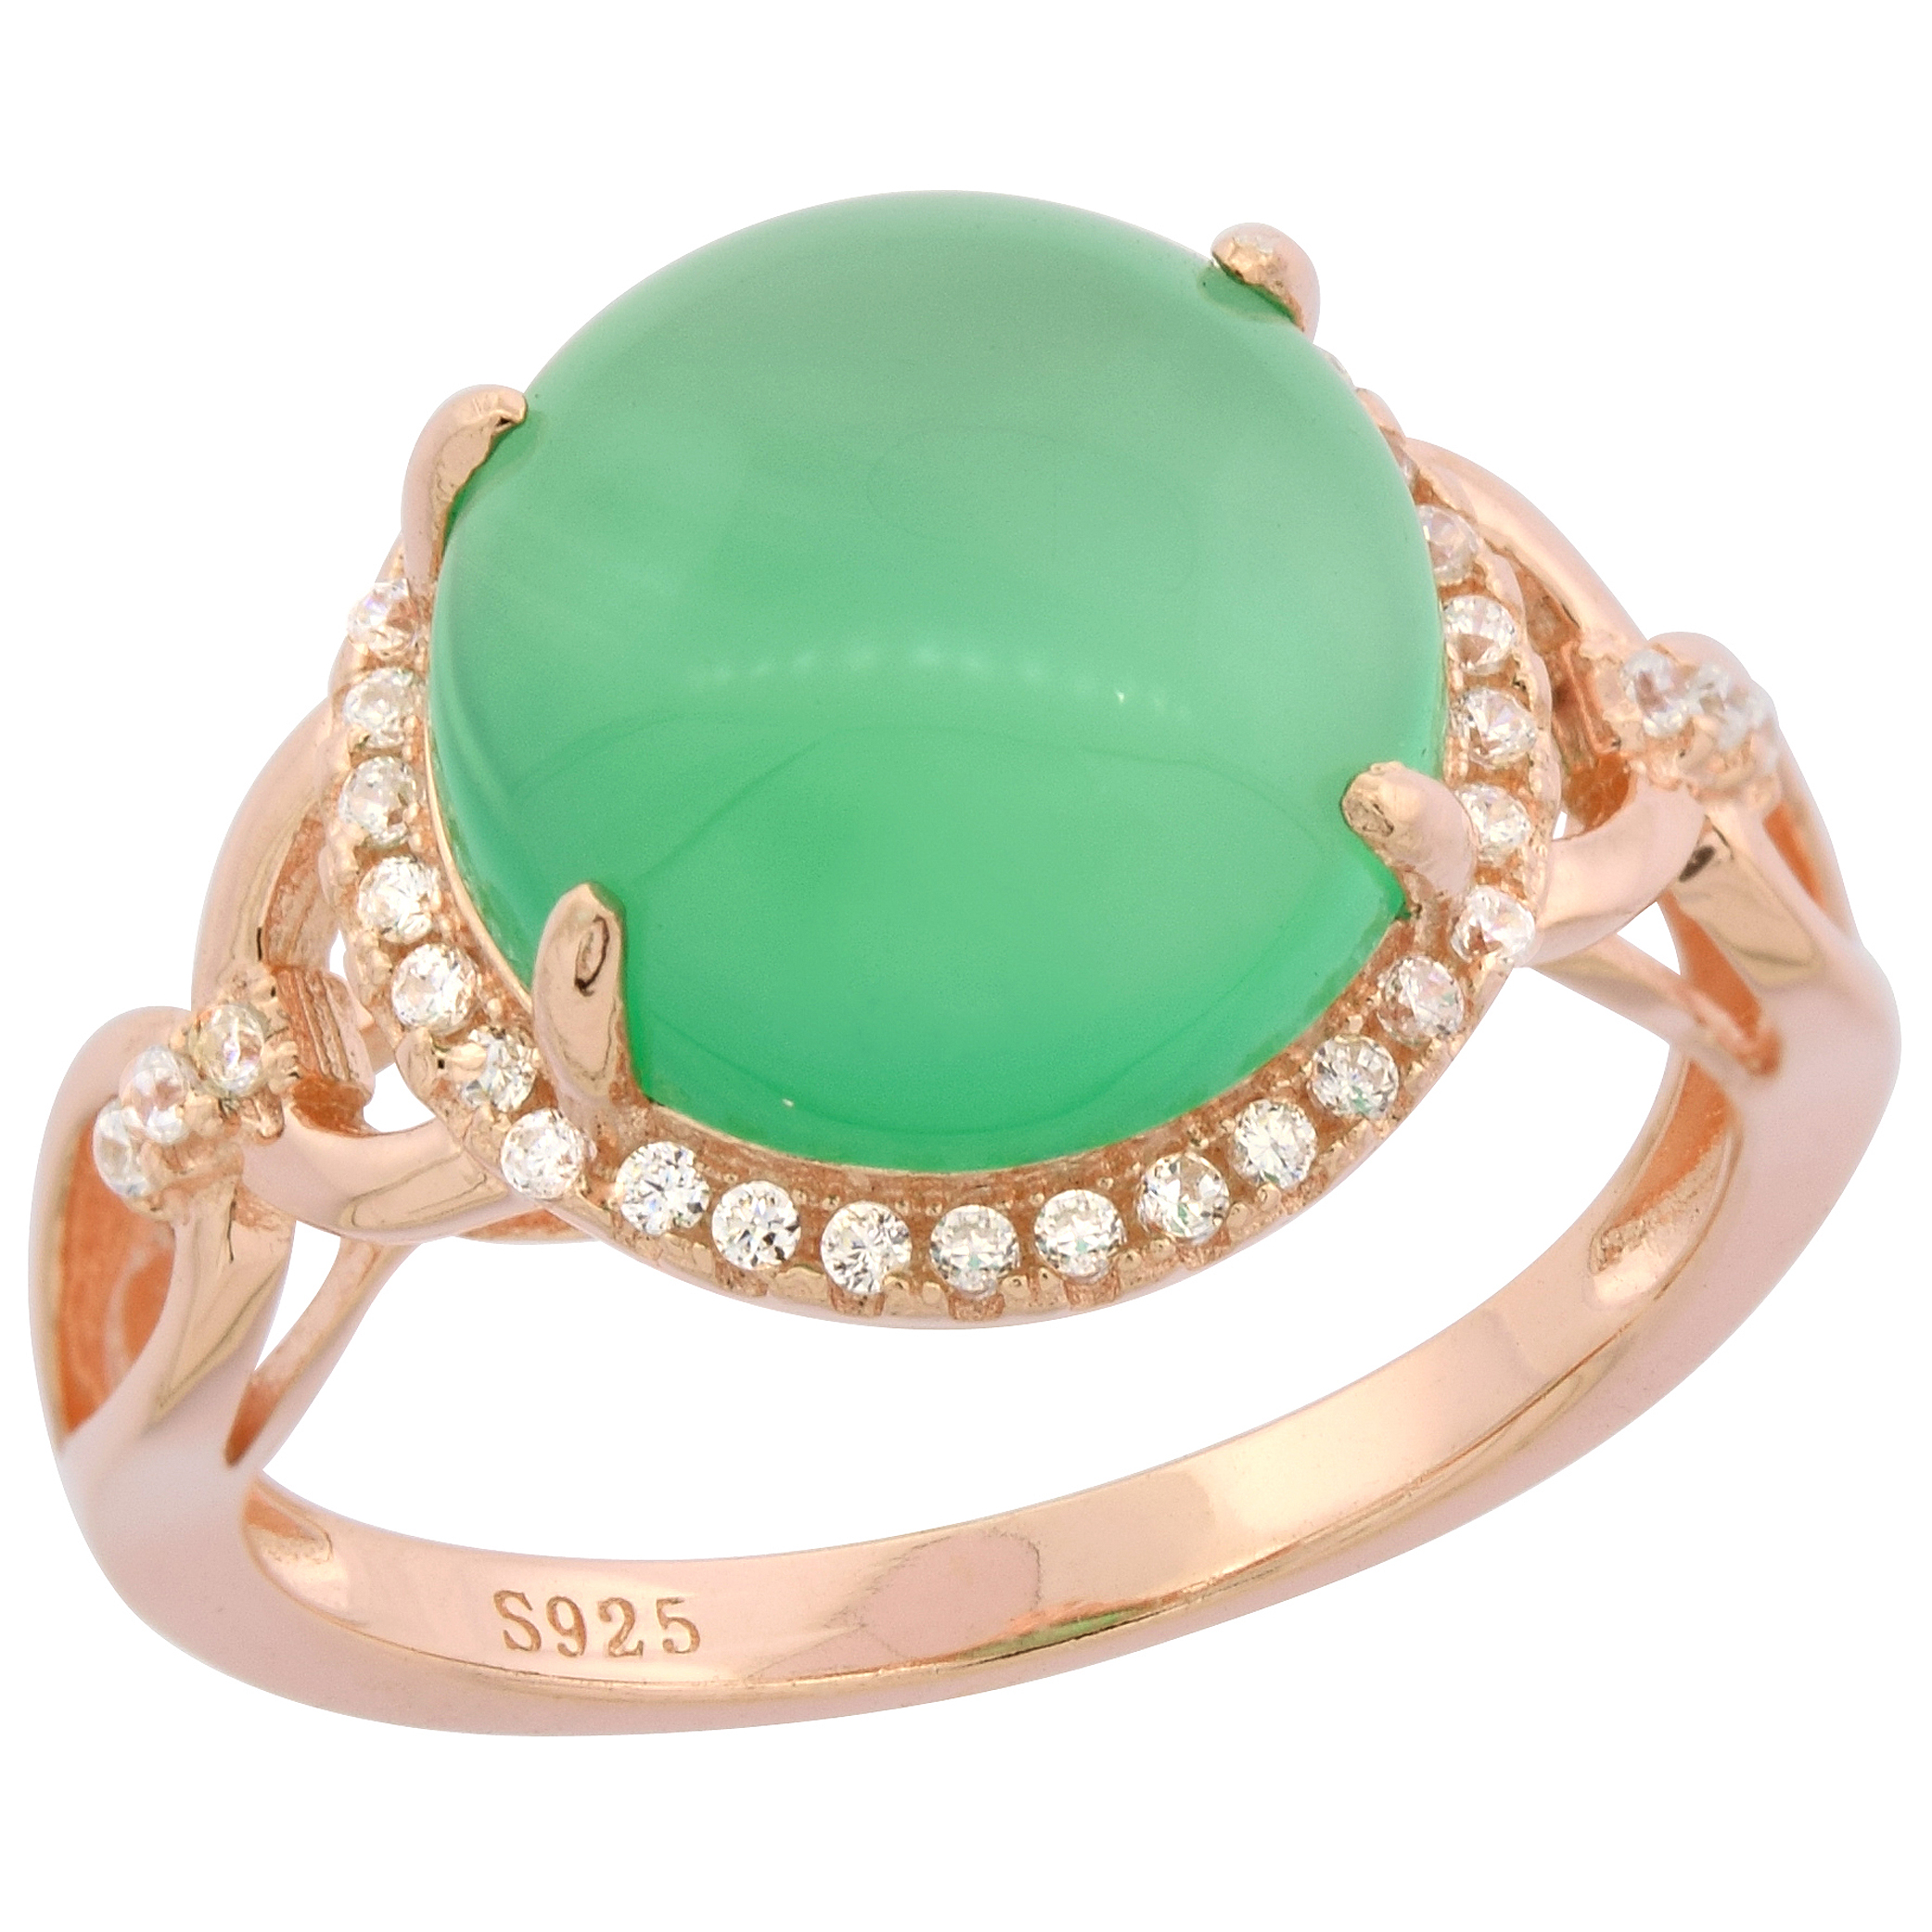 Sterling Silver Large Round Green Serpentine Ring CZ Accents Rose Gold Finish, 7/16 inch wide, sizes 6 - 9